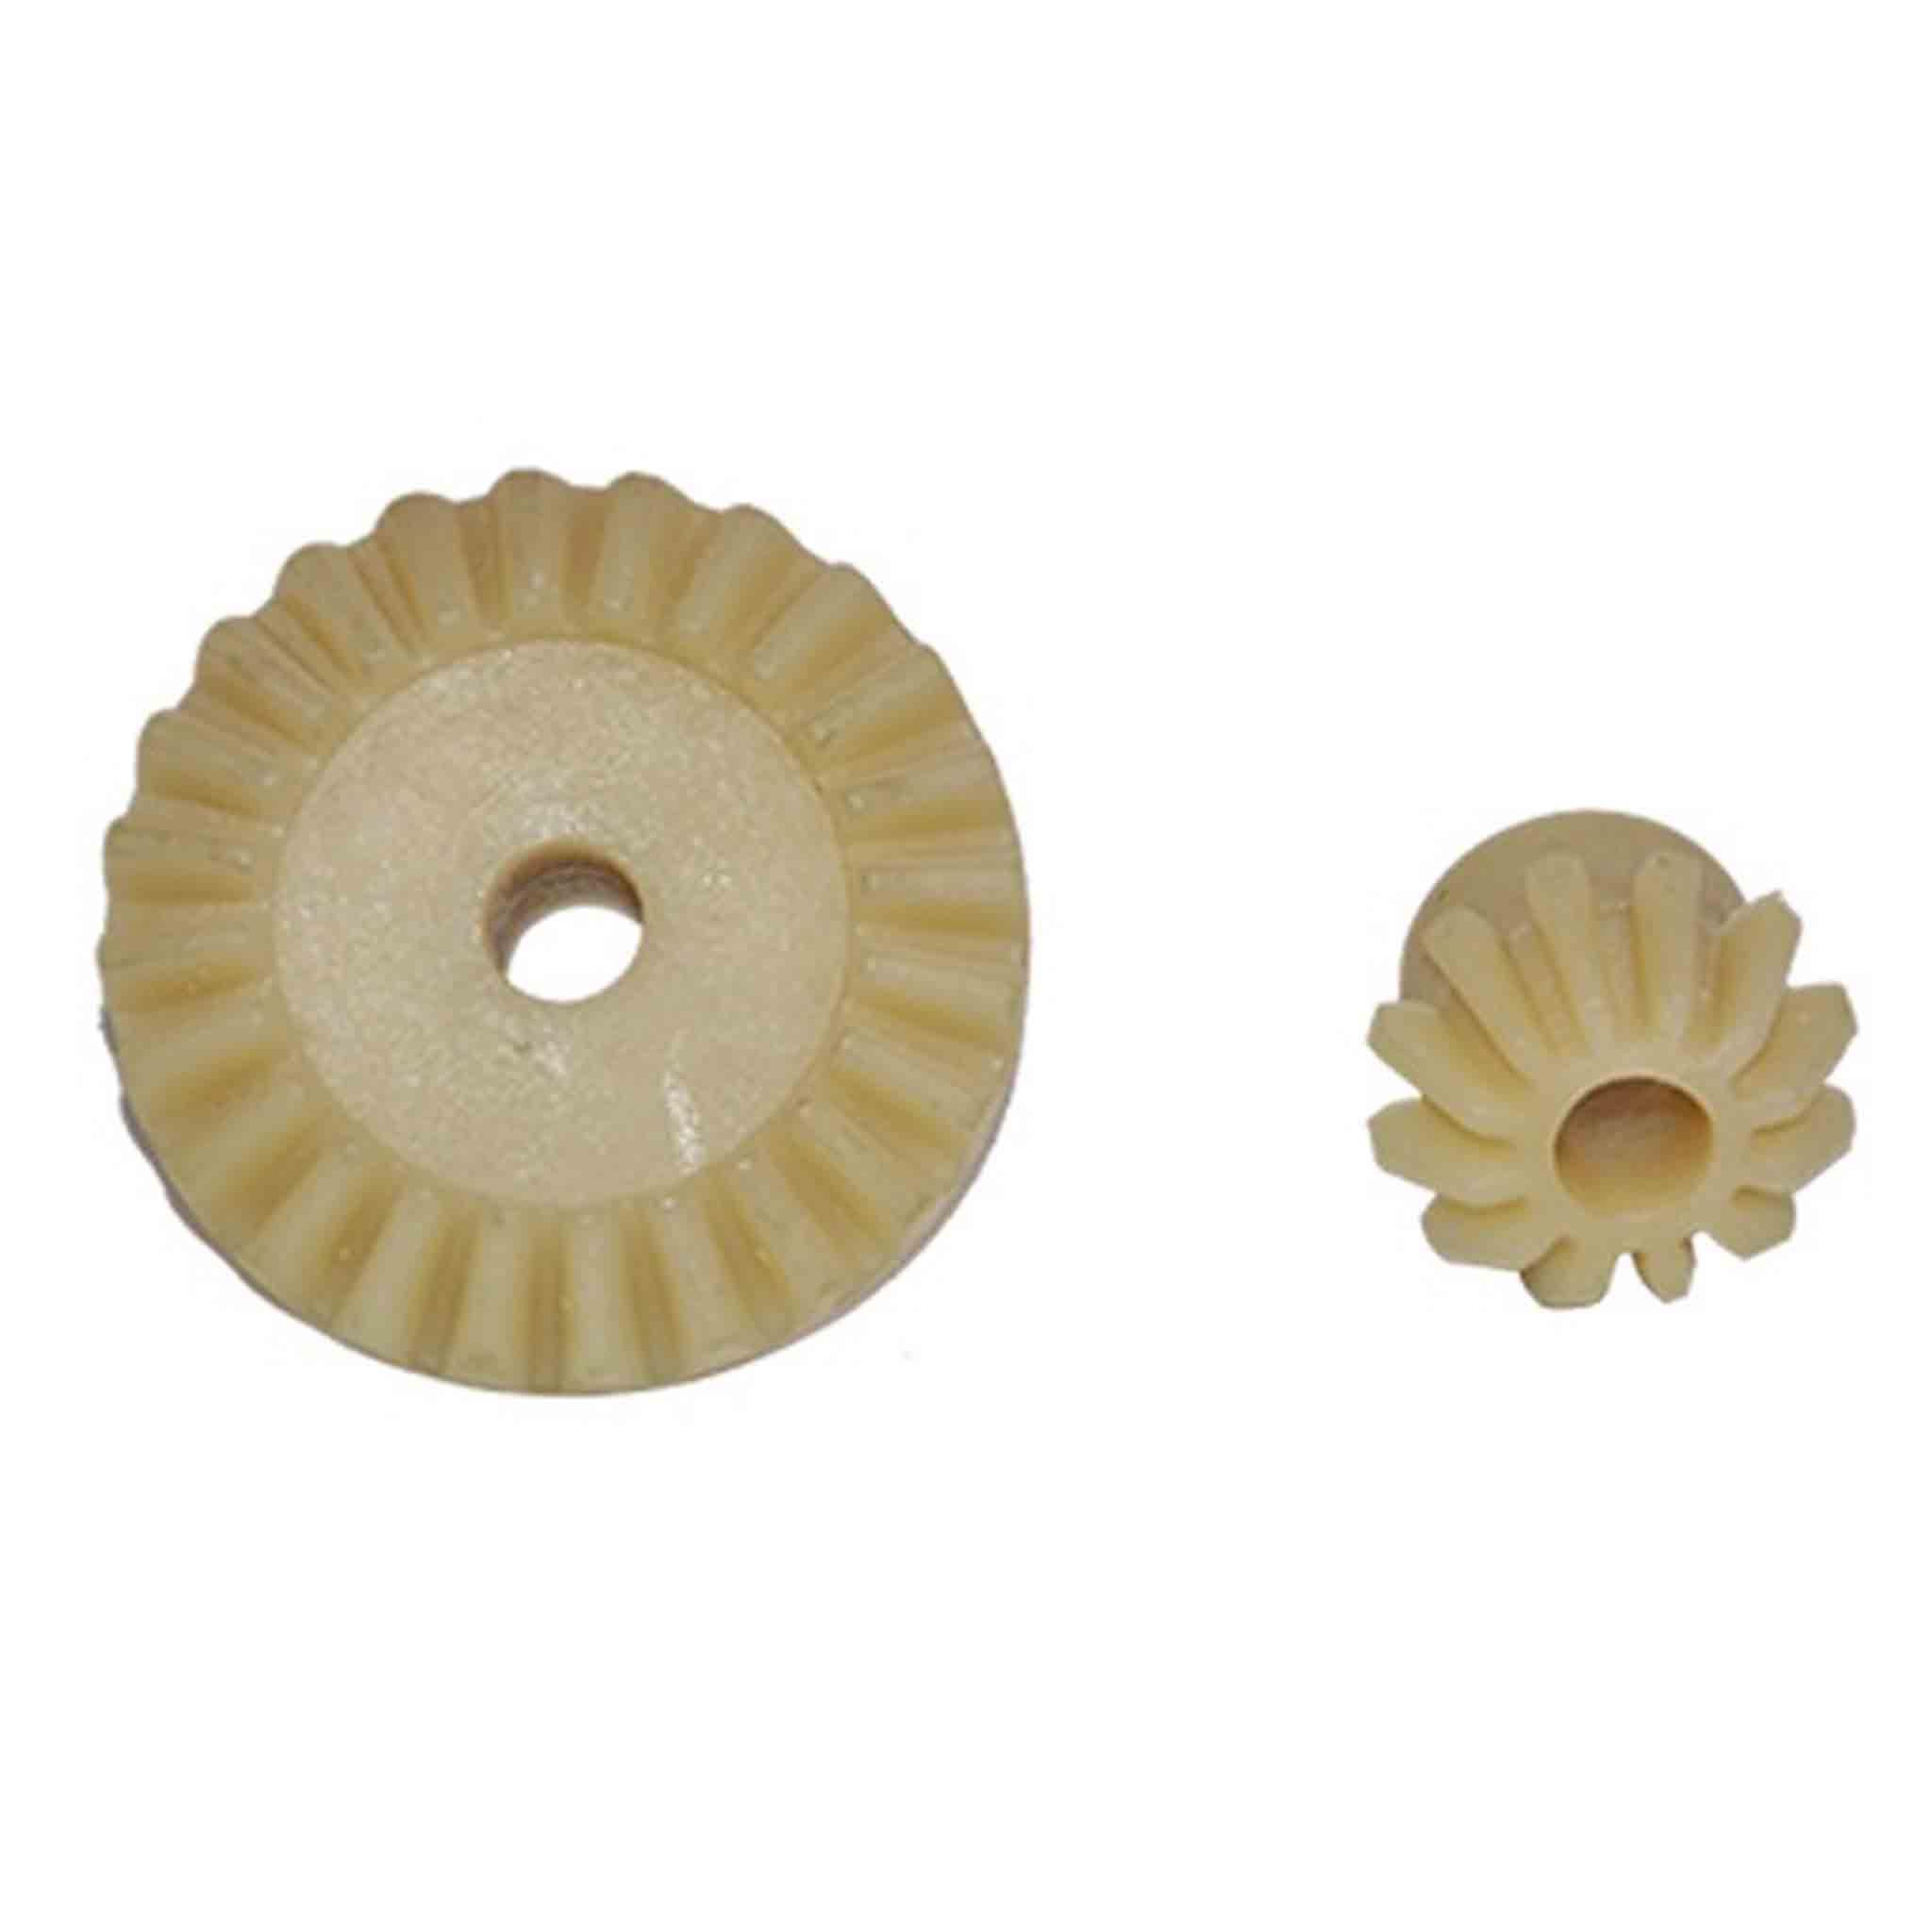 Nylon Spare Bevel Gears for Honey Extractors - Honey Extractor collection by Buzzbee Beekeeping Supplies